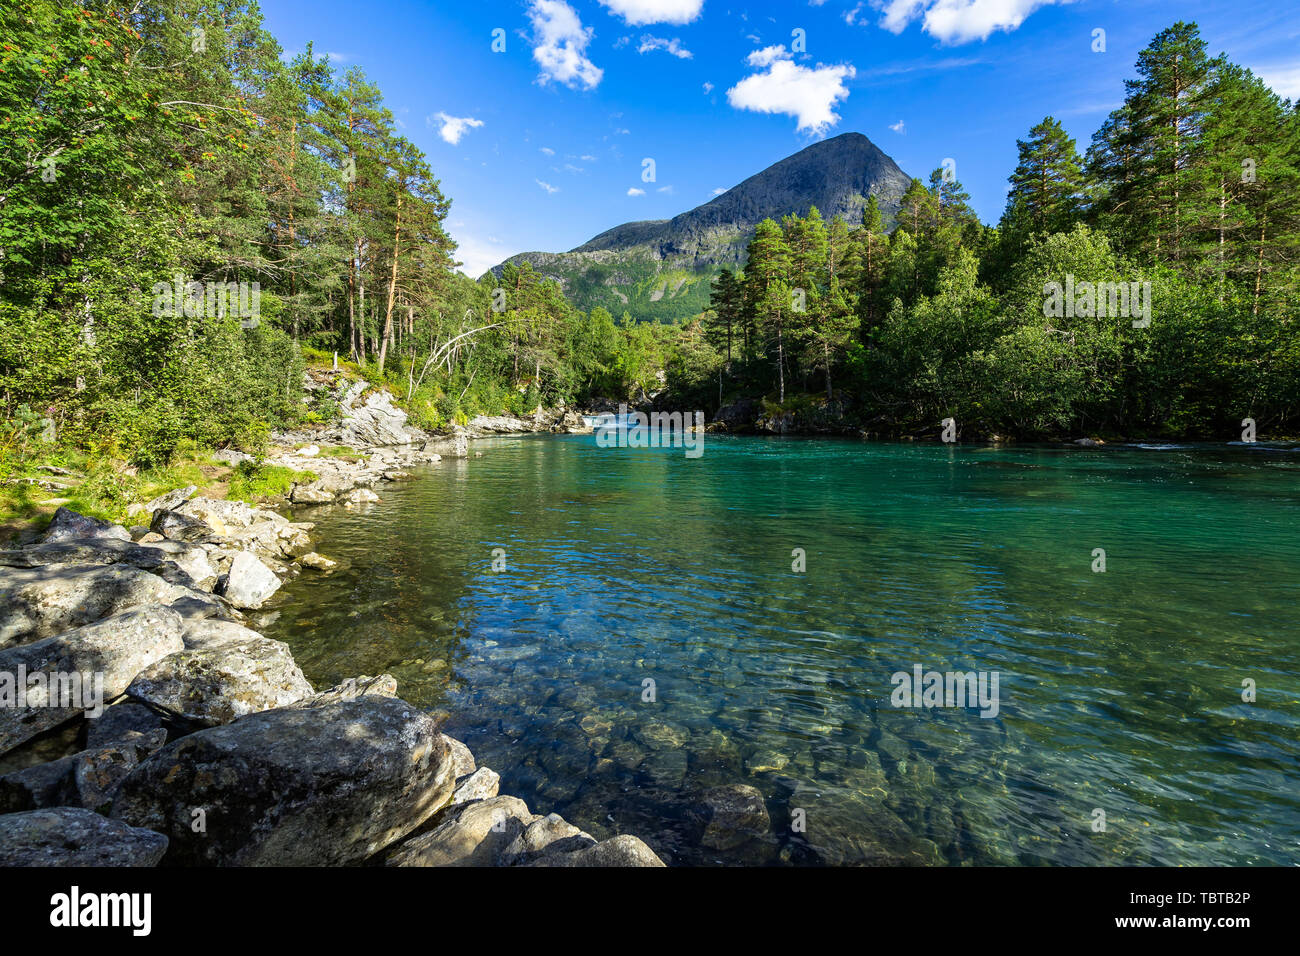 Clear waters of the Valldola River in the beautiful nature of Valldalen Valley, Sunnmore, More og Romsdal, Norway Stock Photo